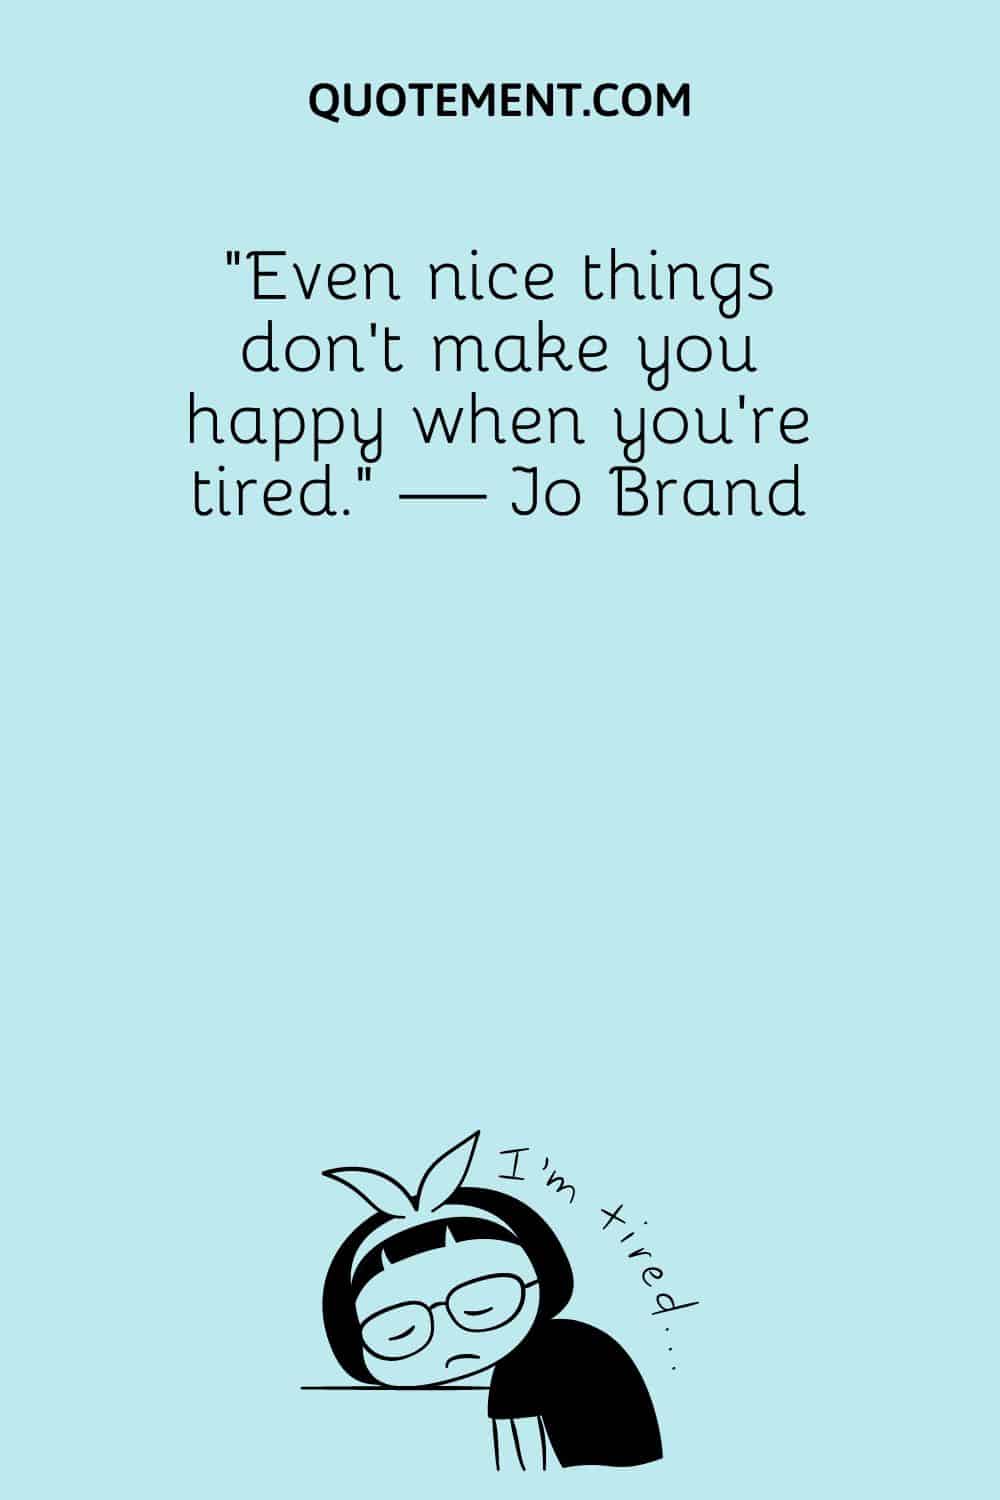 Even nice things don’t make you happy when you’re tired